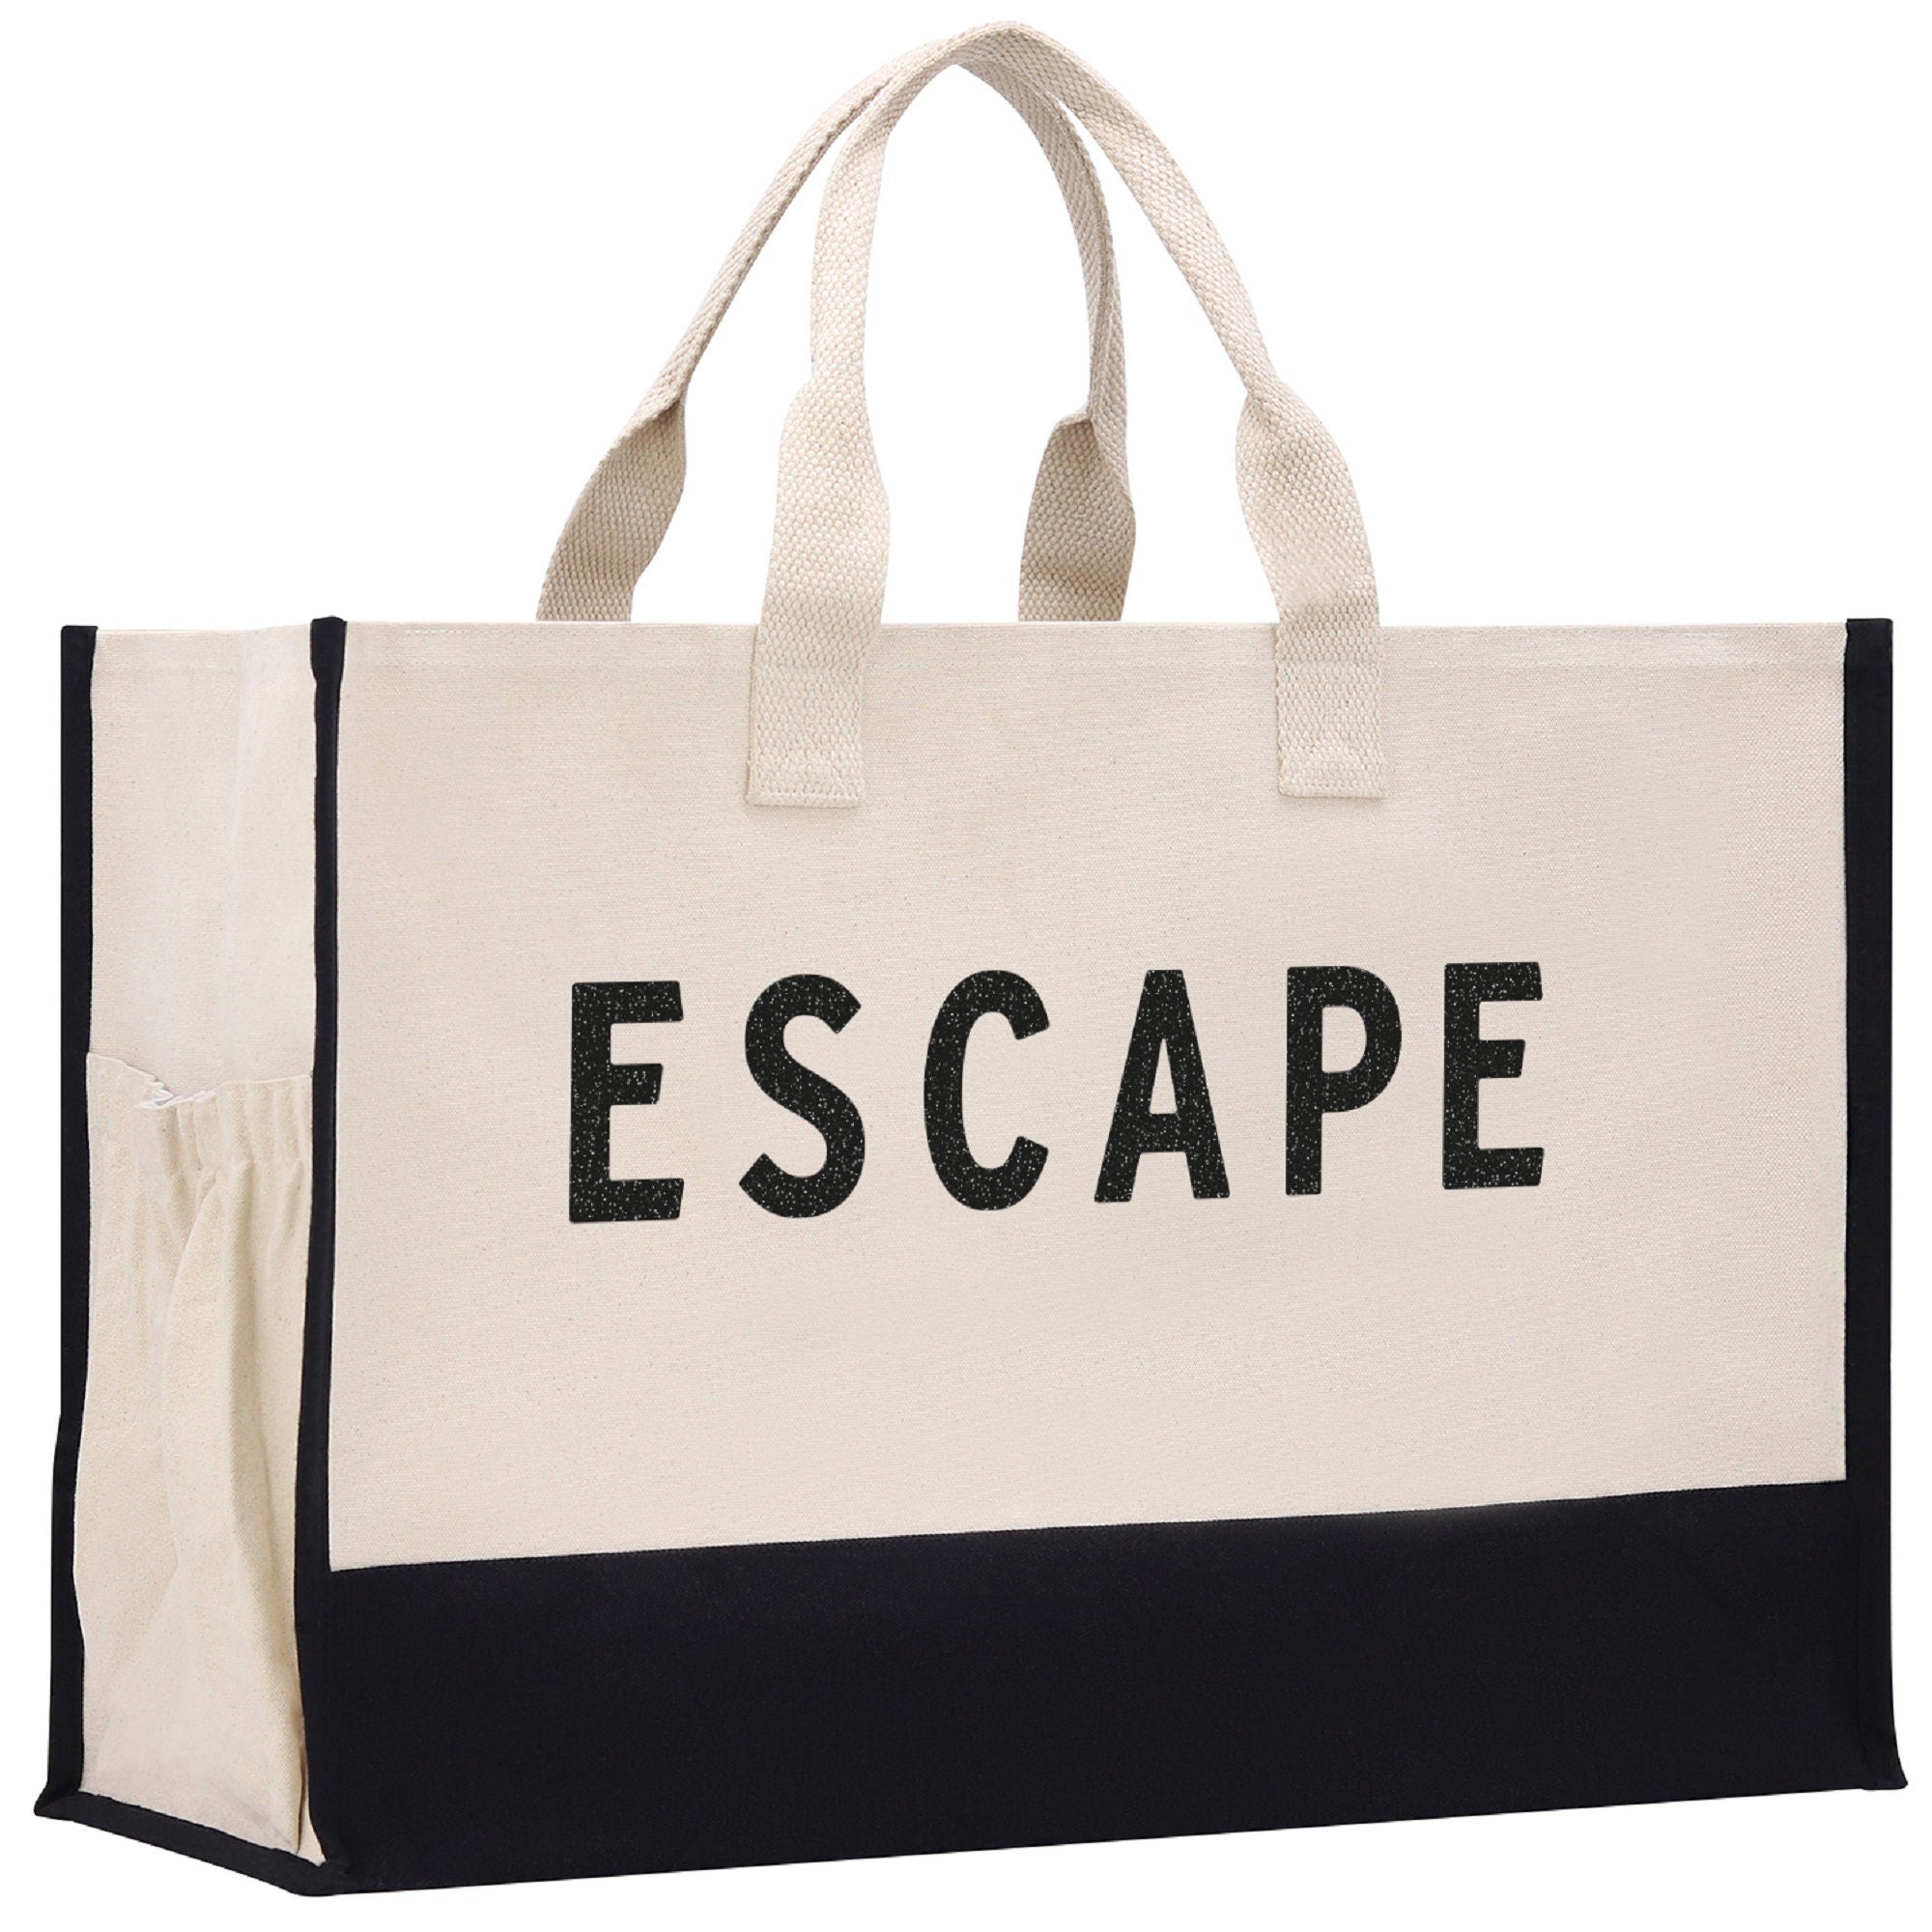 Escape Beach Tote Bag XL - Oversized Chic Tote Bag with Zipper and Inner Pocket -Gift for Her -Vacation Tote Bag -Weekender Bag -Travel Tote